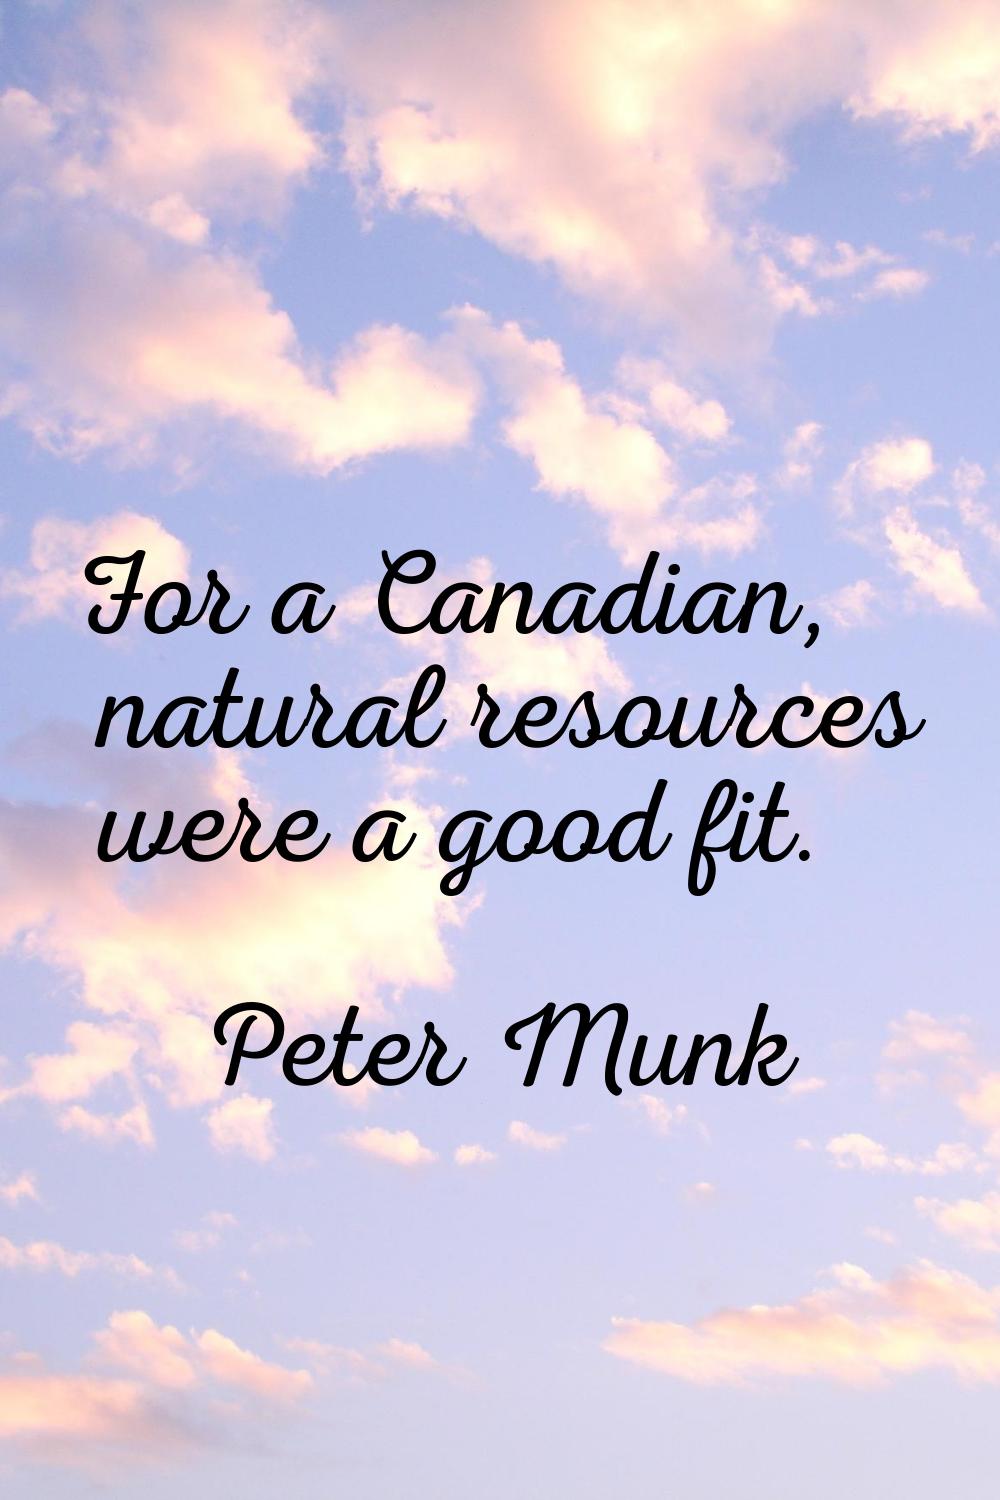 For a Canadian, natural resources were a good fit.